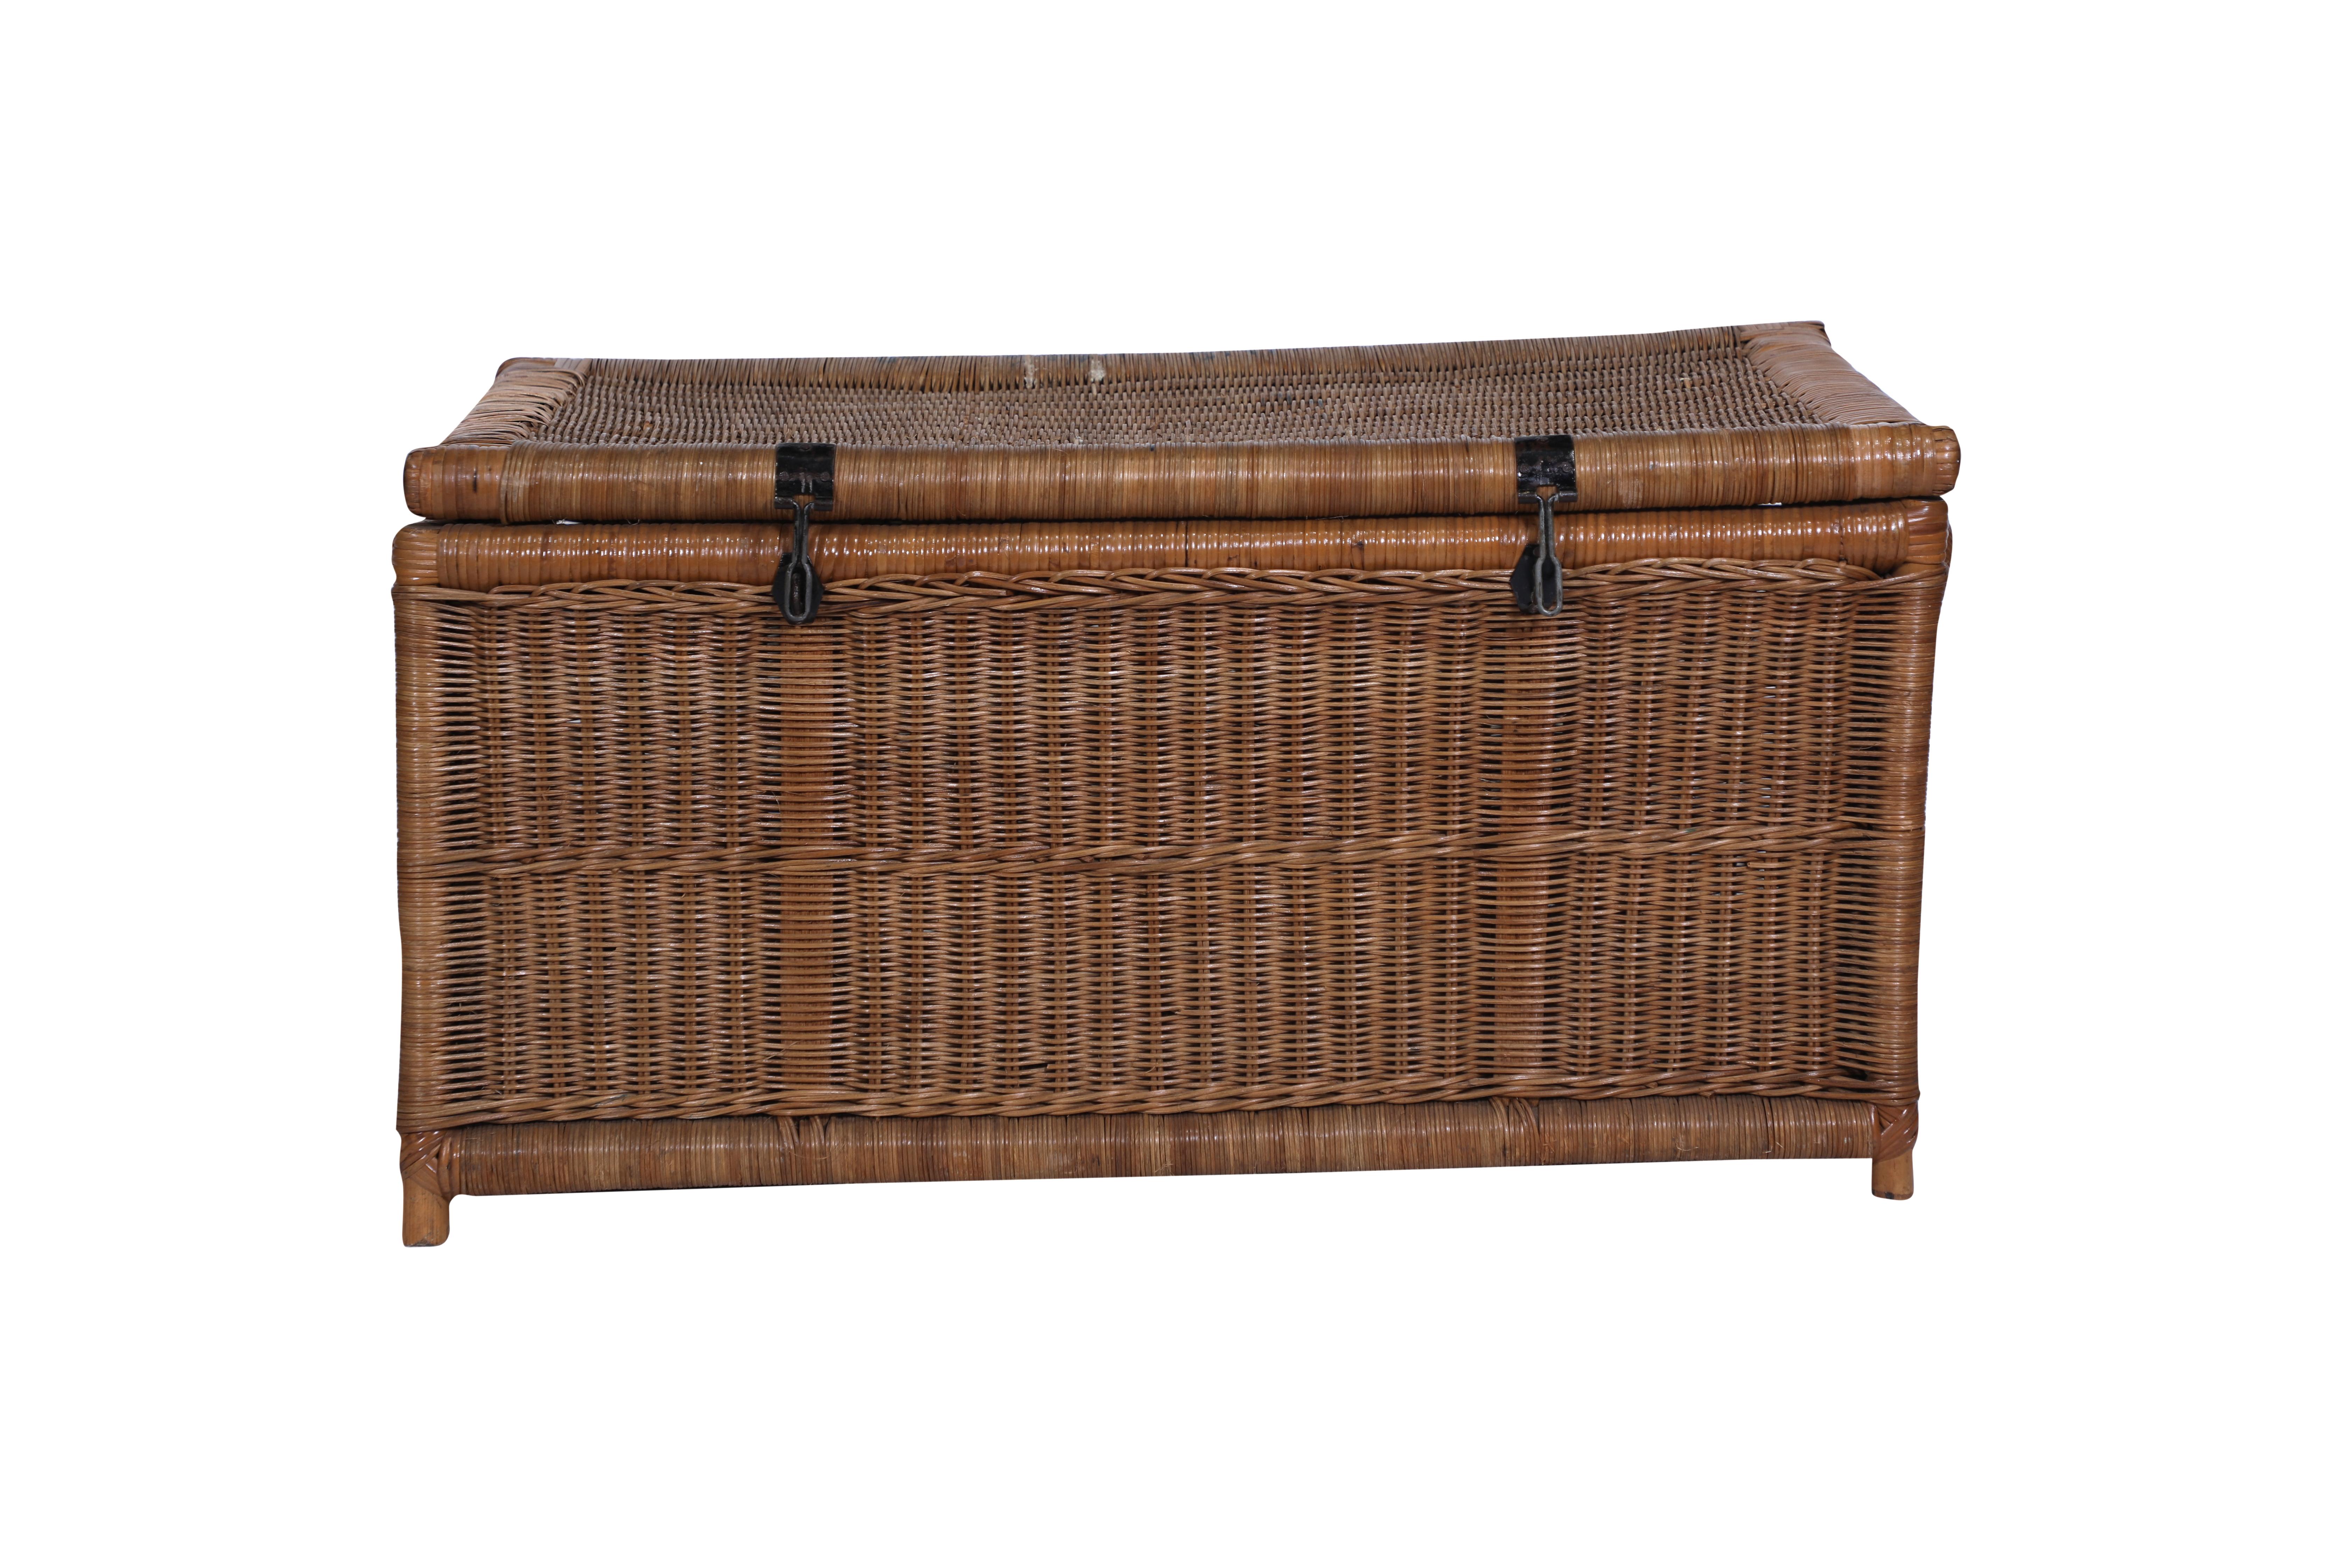 A hand-woven caned wicker blanket chest or trunk with iron handles and hasp locks.  In very good condition with some blurred writing along the top edge.  Great as a coffee table or blanket storage.  Colonial British.

The Lockhart Collection is a